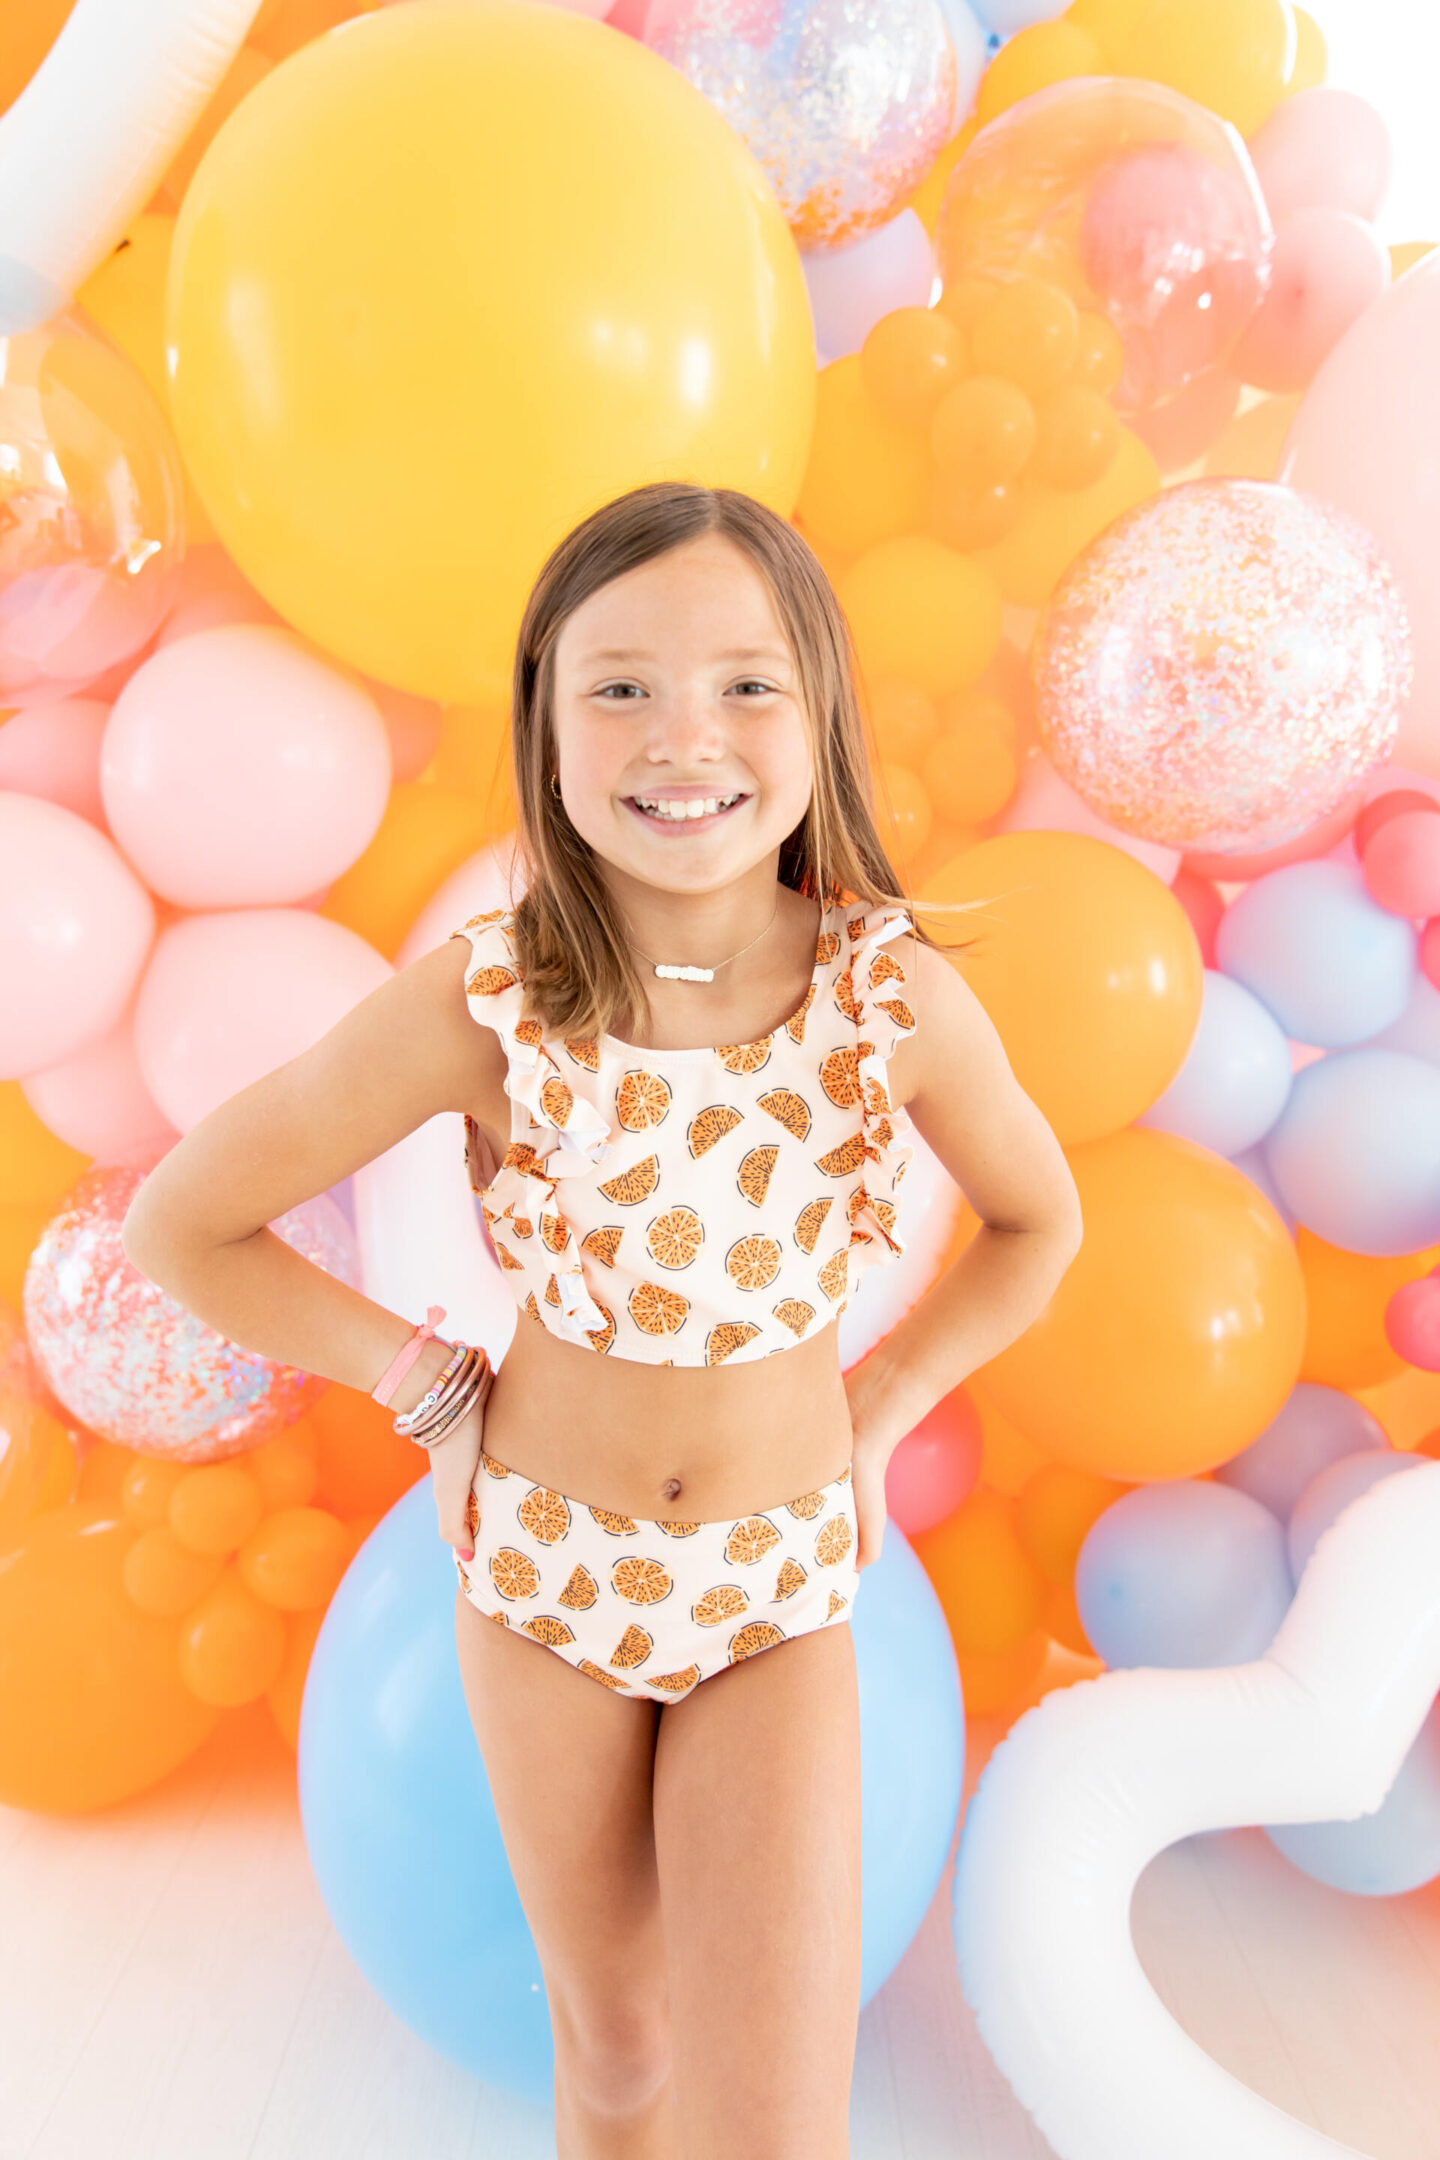 The Oaks Apparel x Hello Happiness  swimsuits collection